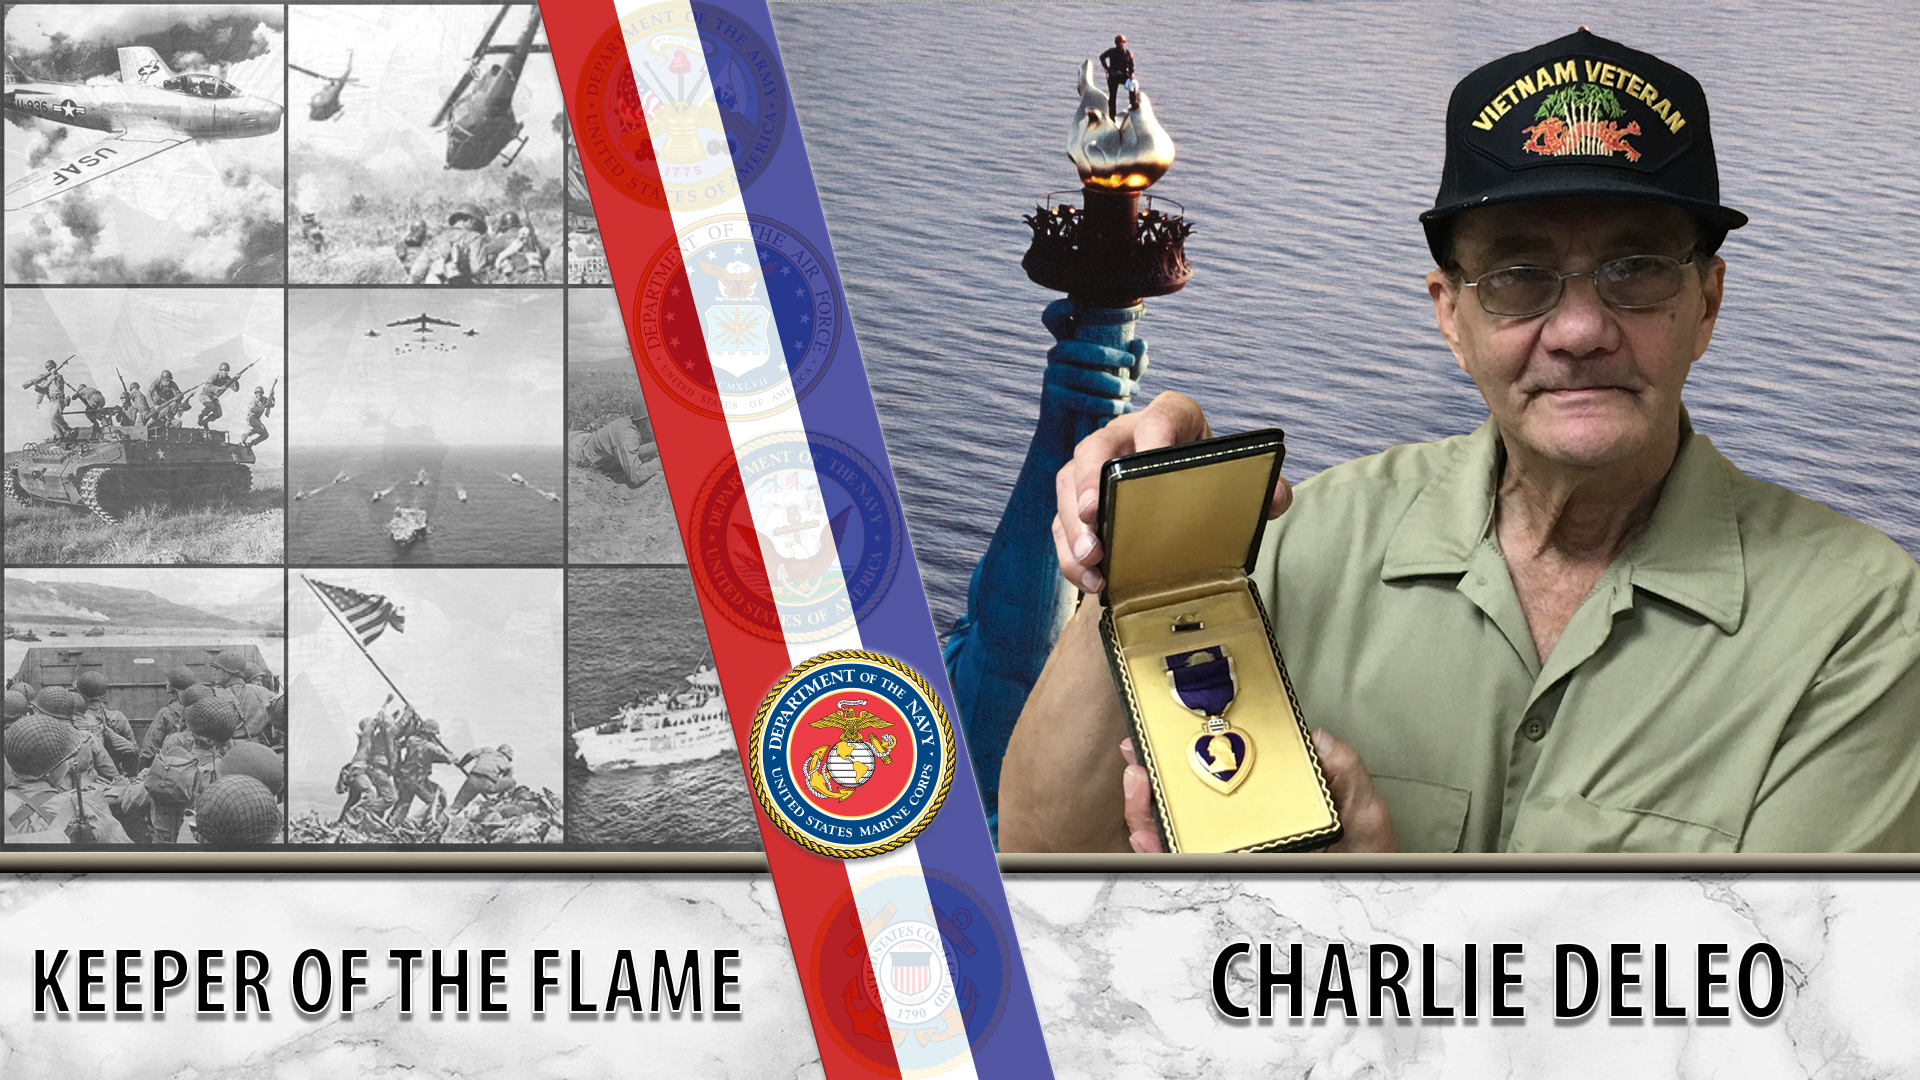 Charlie DeLeo is the Statue of Liberty's keeper of the flame.